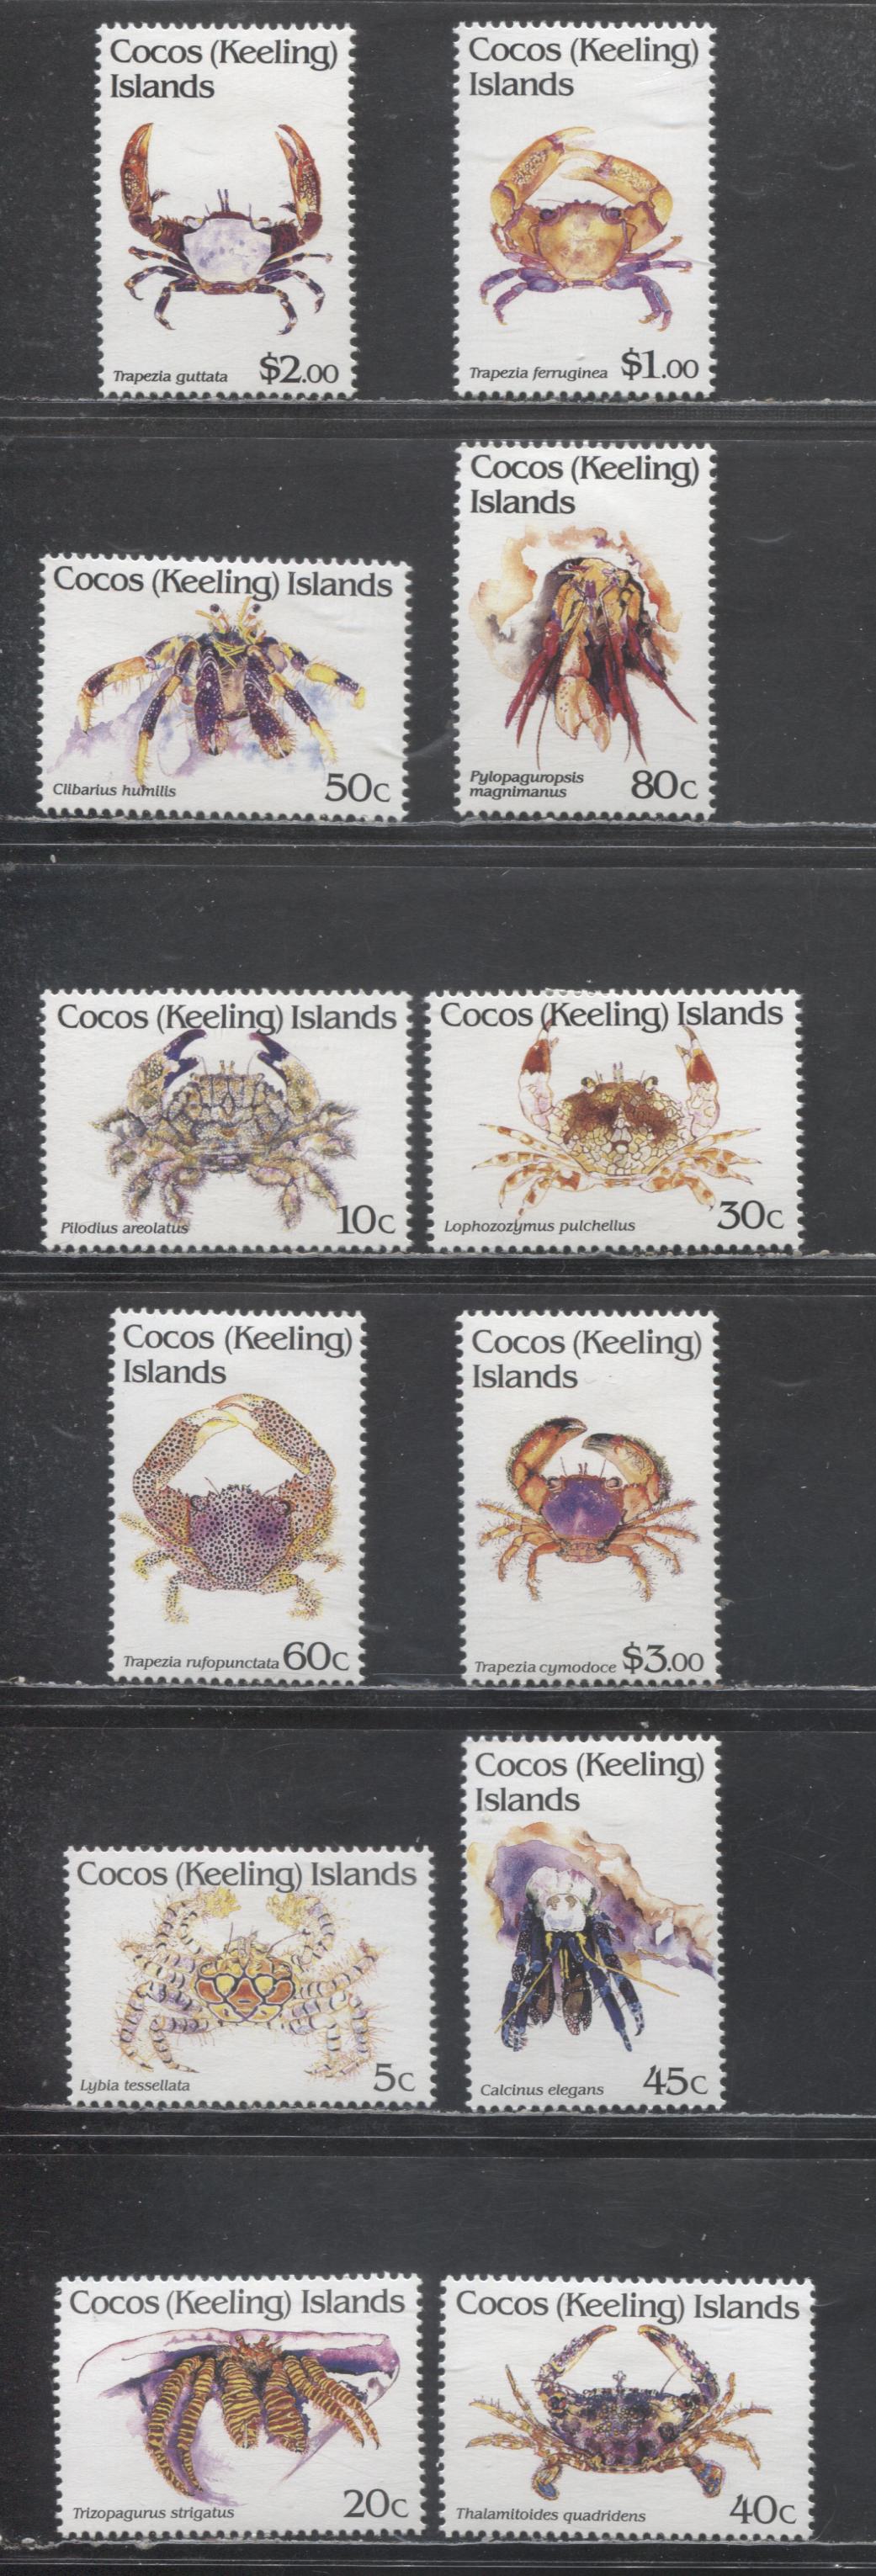 Lot 166 Cocos Islands SC#249-260 1992 Crustacean Definitives, 12 VFOG Singles, Click on Listing to See ALL Pictures, Estimated Value $15